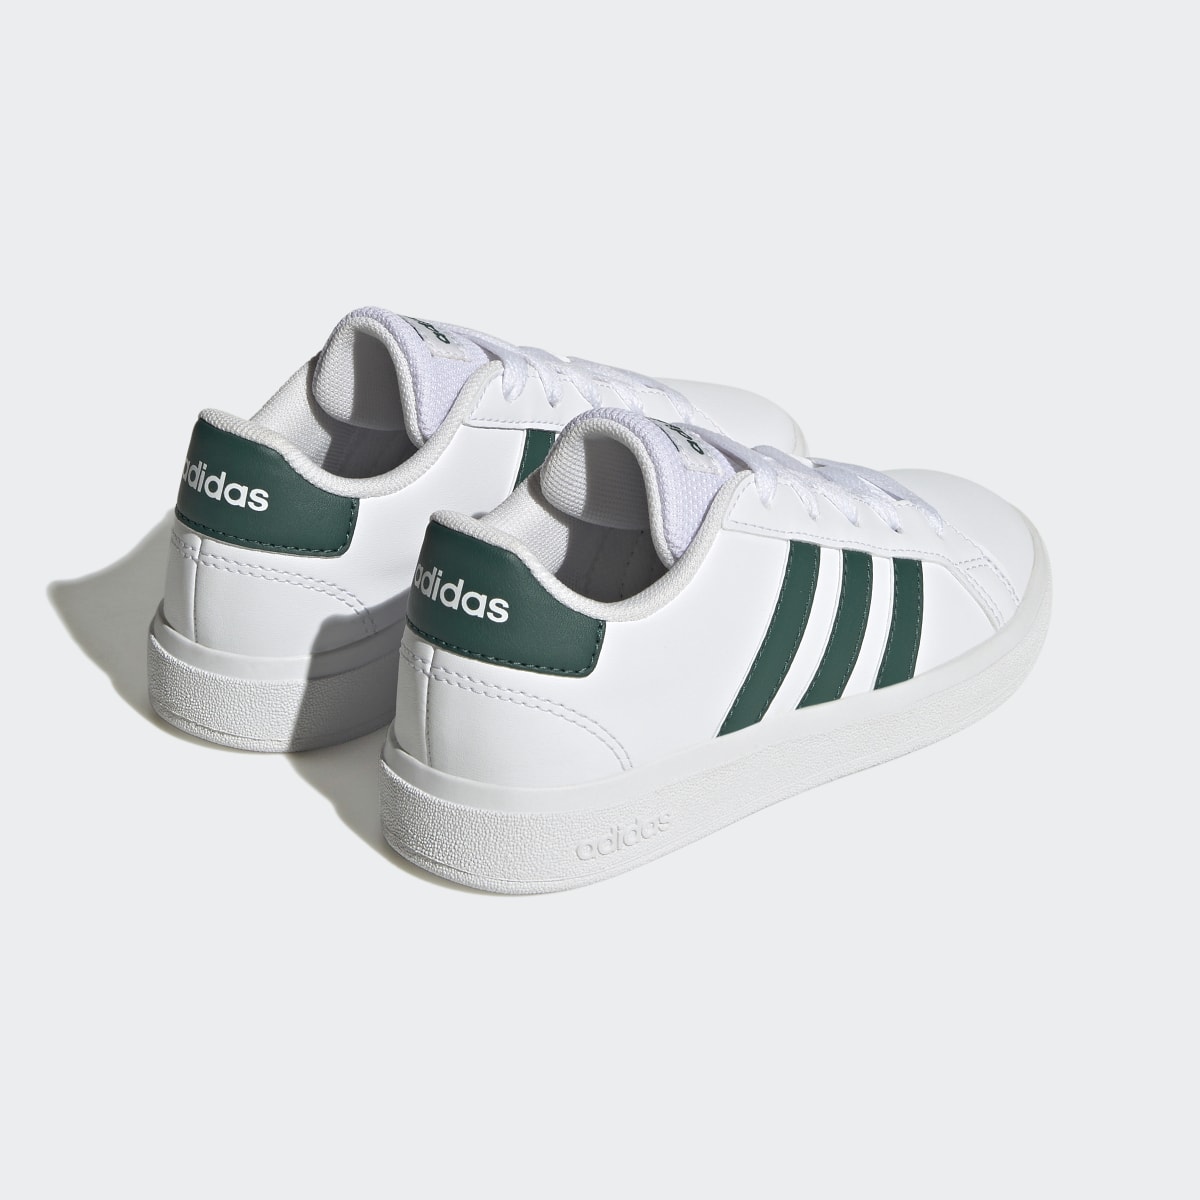 Adidas Buty Grand Court Lifestyle Tennis Lace-Up. 6